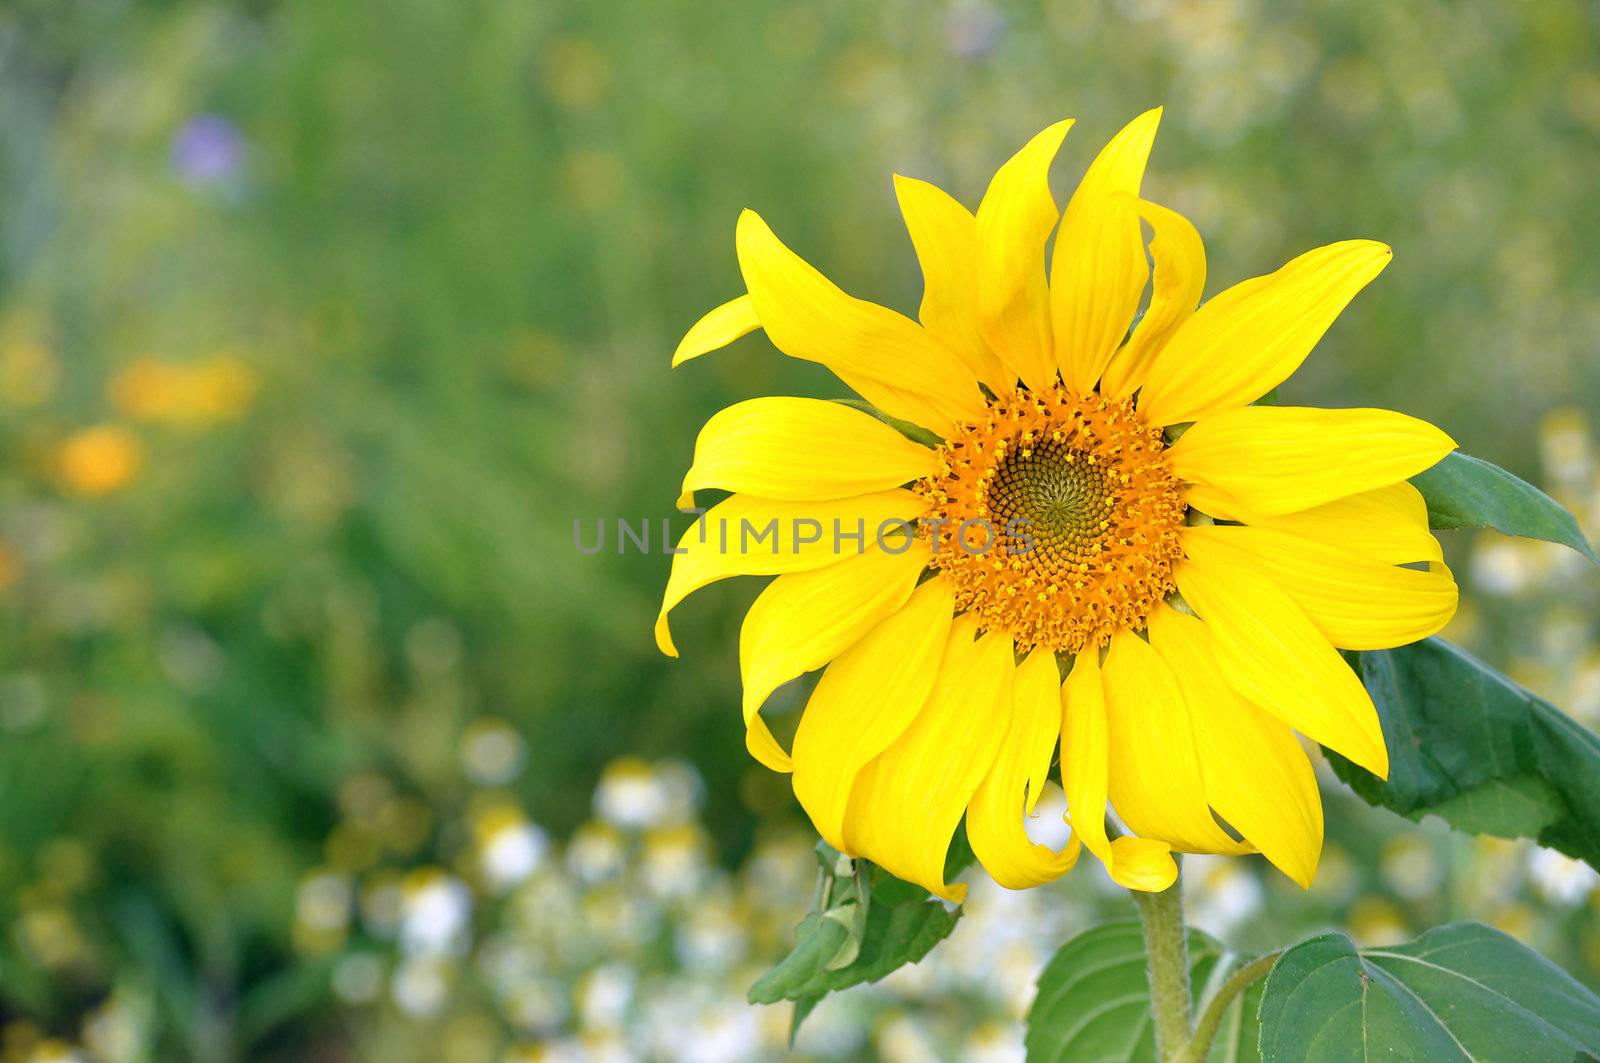 The sunflower has a rough, hairy stem, broad, coarsely toothed, rough leaves and circular heads of flowers.